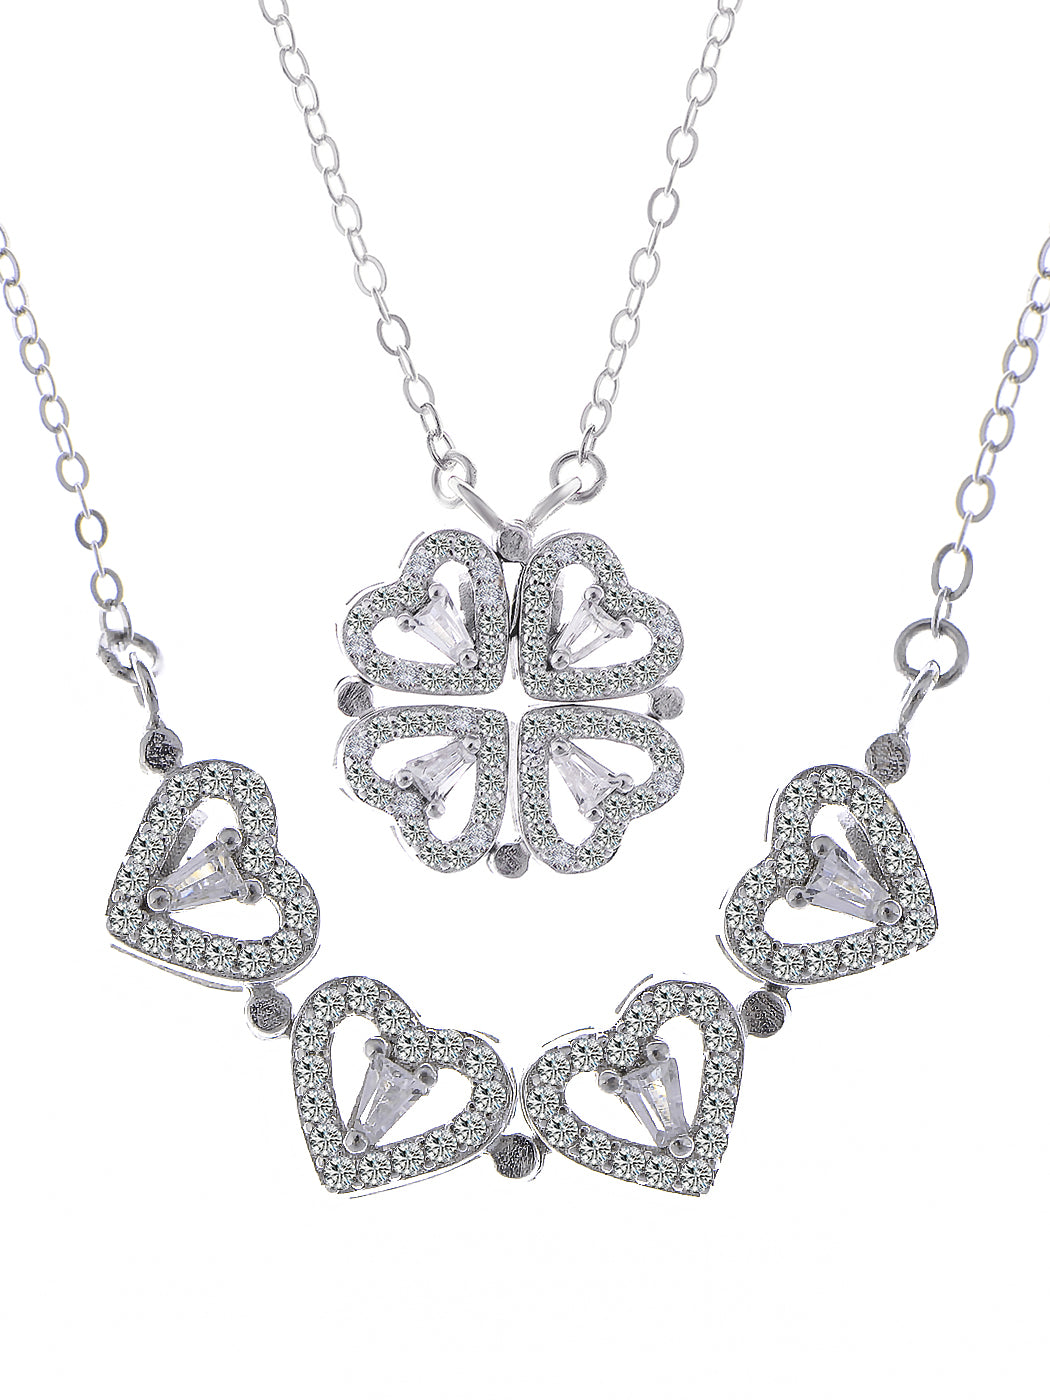 Alilang Women's Sparkly Clear Crystal Rhinestones Heart Four Leaf Clover Convertible Pendant Necklace for Teen Girls Christmas Jewelry